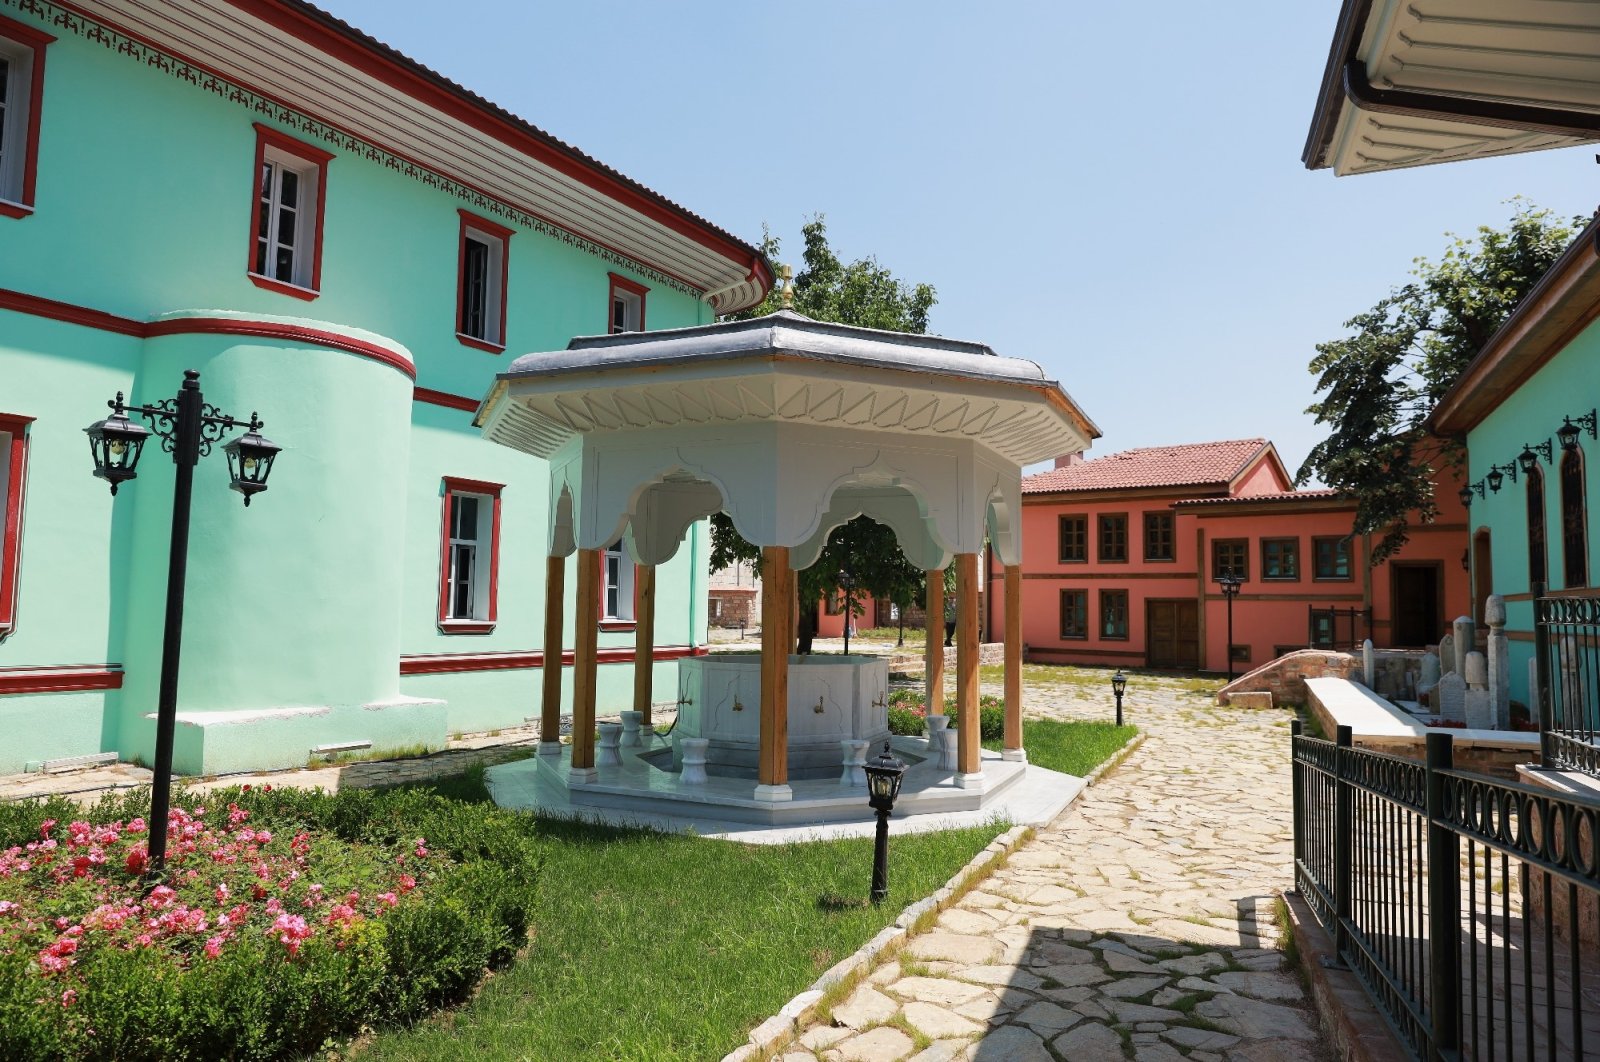 The Bursa Mevlevi Lodge, established by Cününi Ahmed Dede in 1615 under the orders of Ottoman Sultan Ahmed I and later closed by law in 1925, has been restored to its original grandeur by the Metropolitan Municipality, Bursa, Türkiye, Oct. 10, 2023. (IHA Photo)